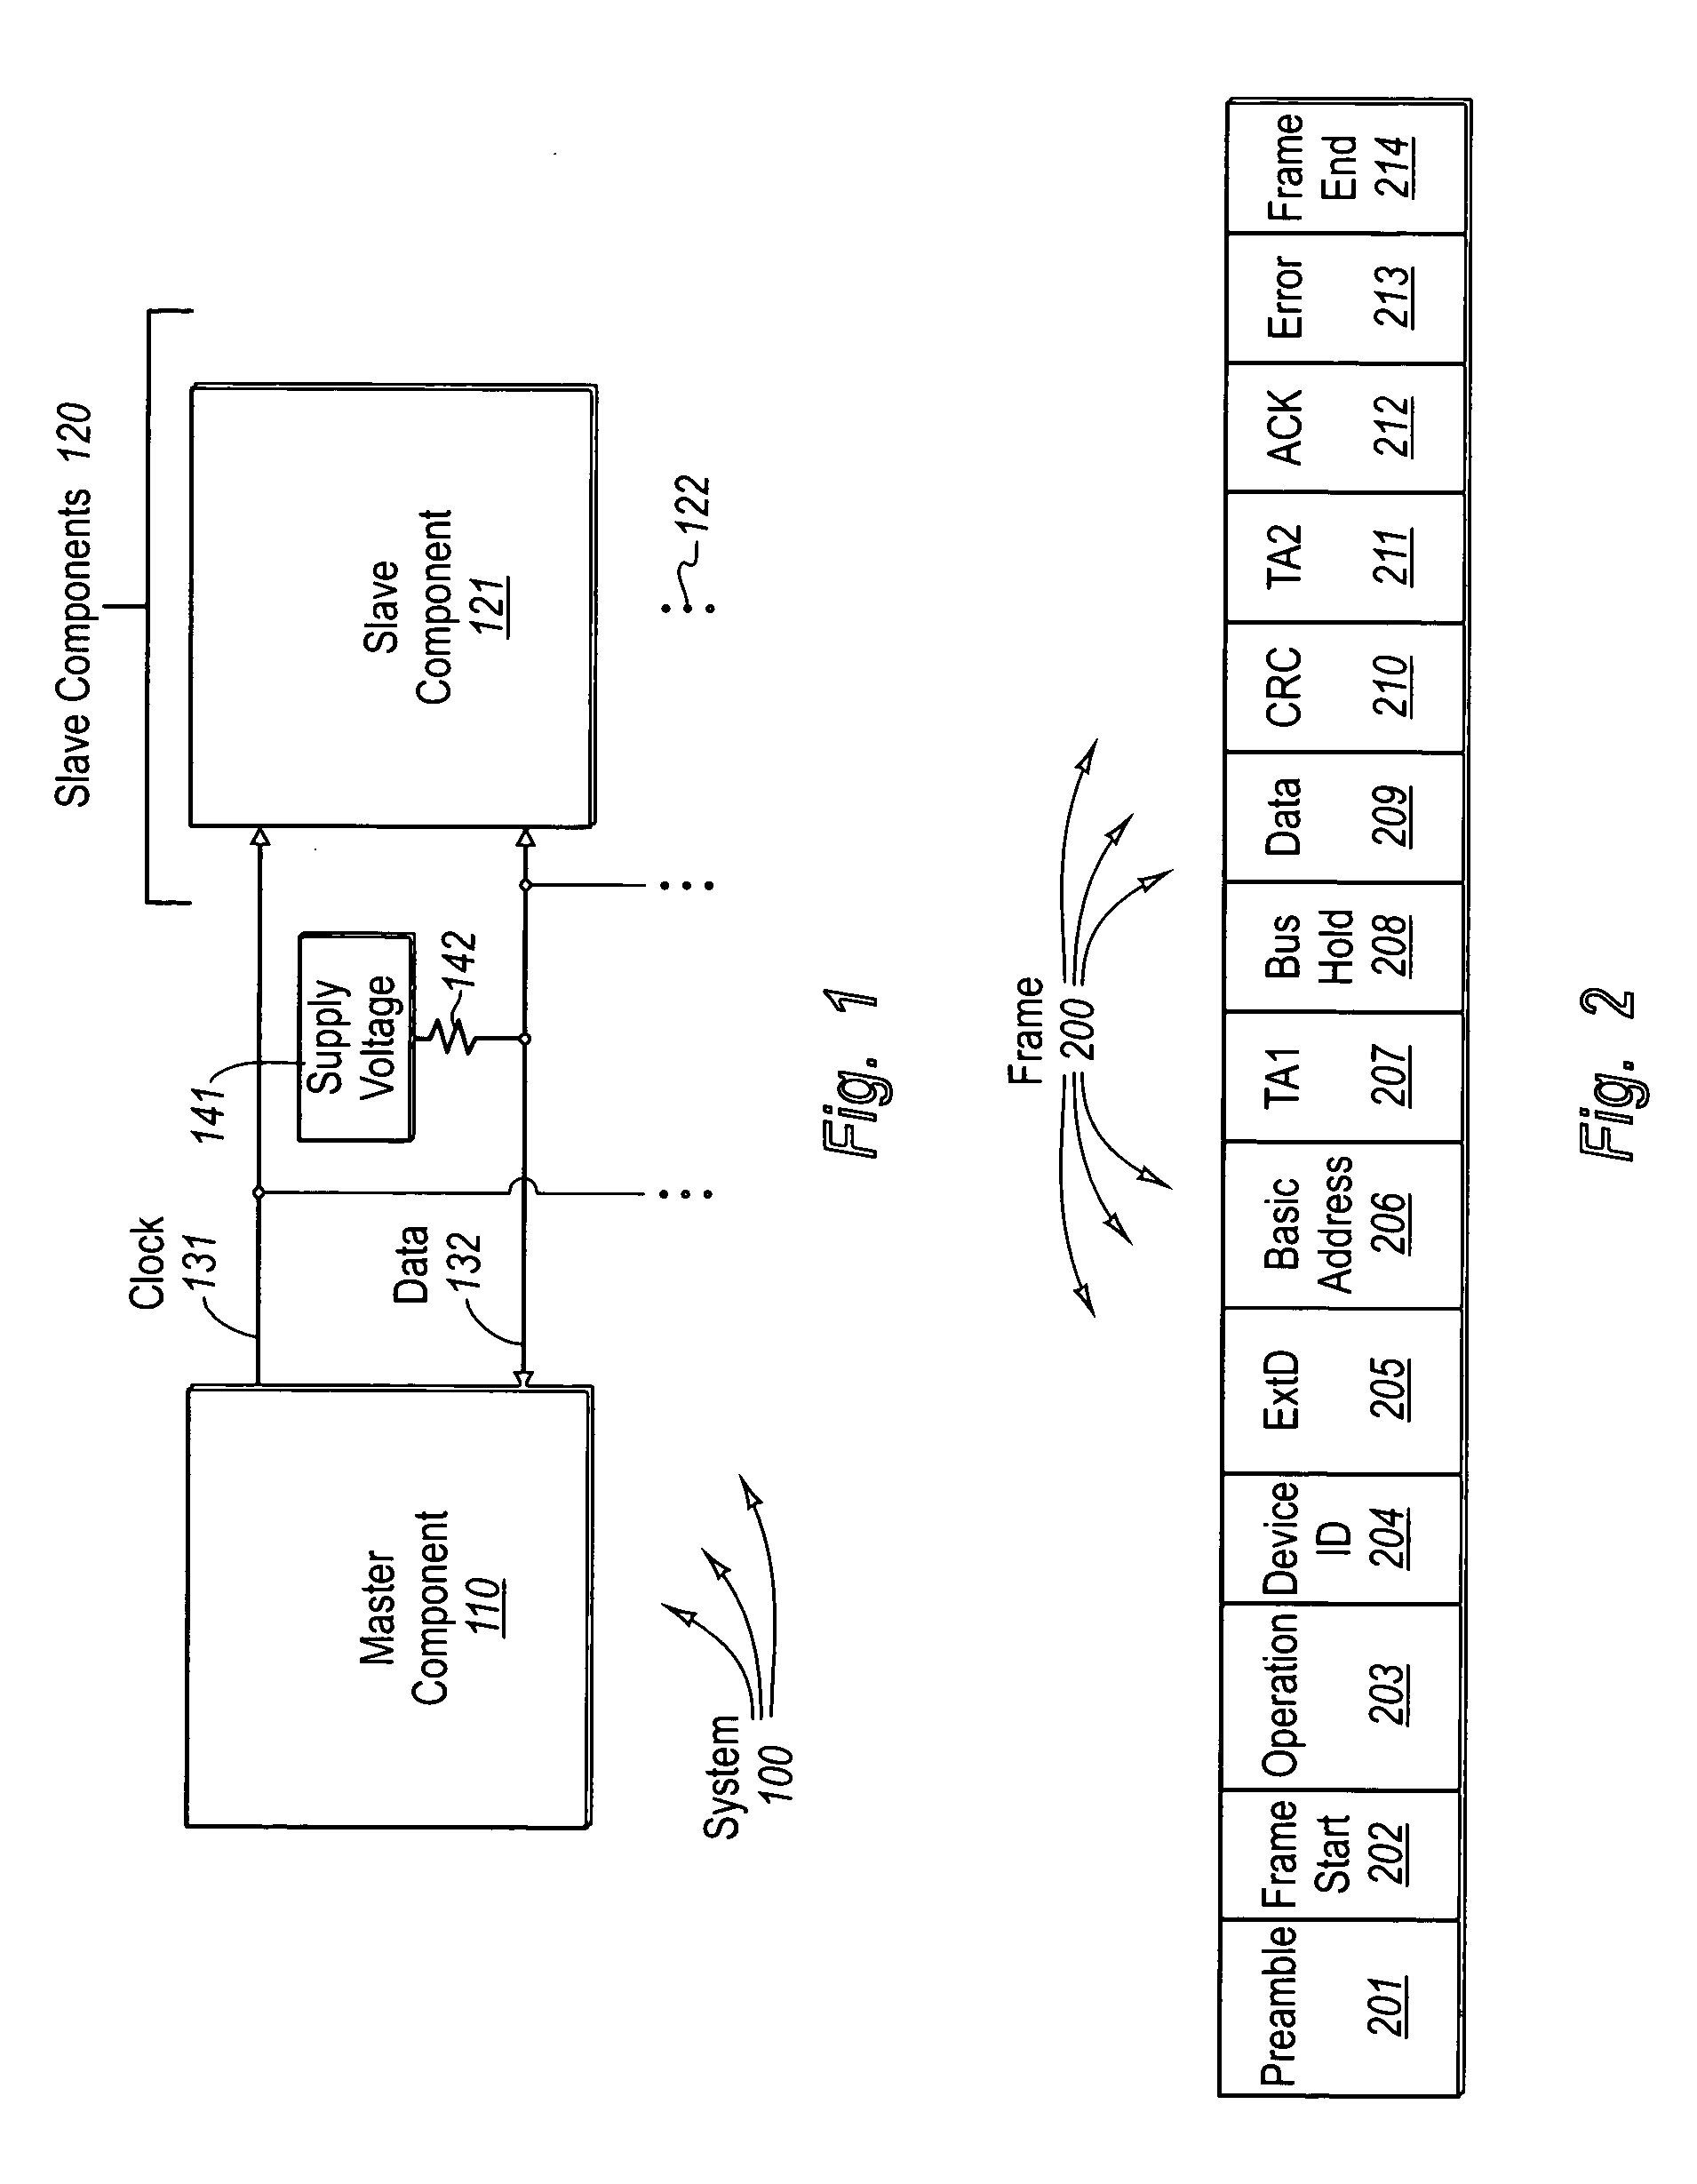 Two-wire interface having dynamically adjustable data fields depending on operation code